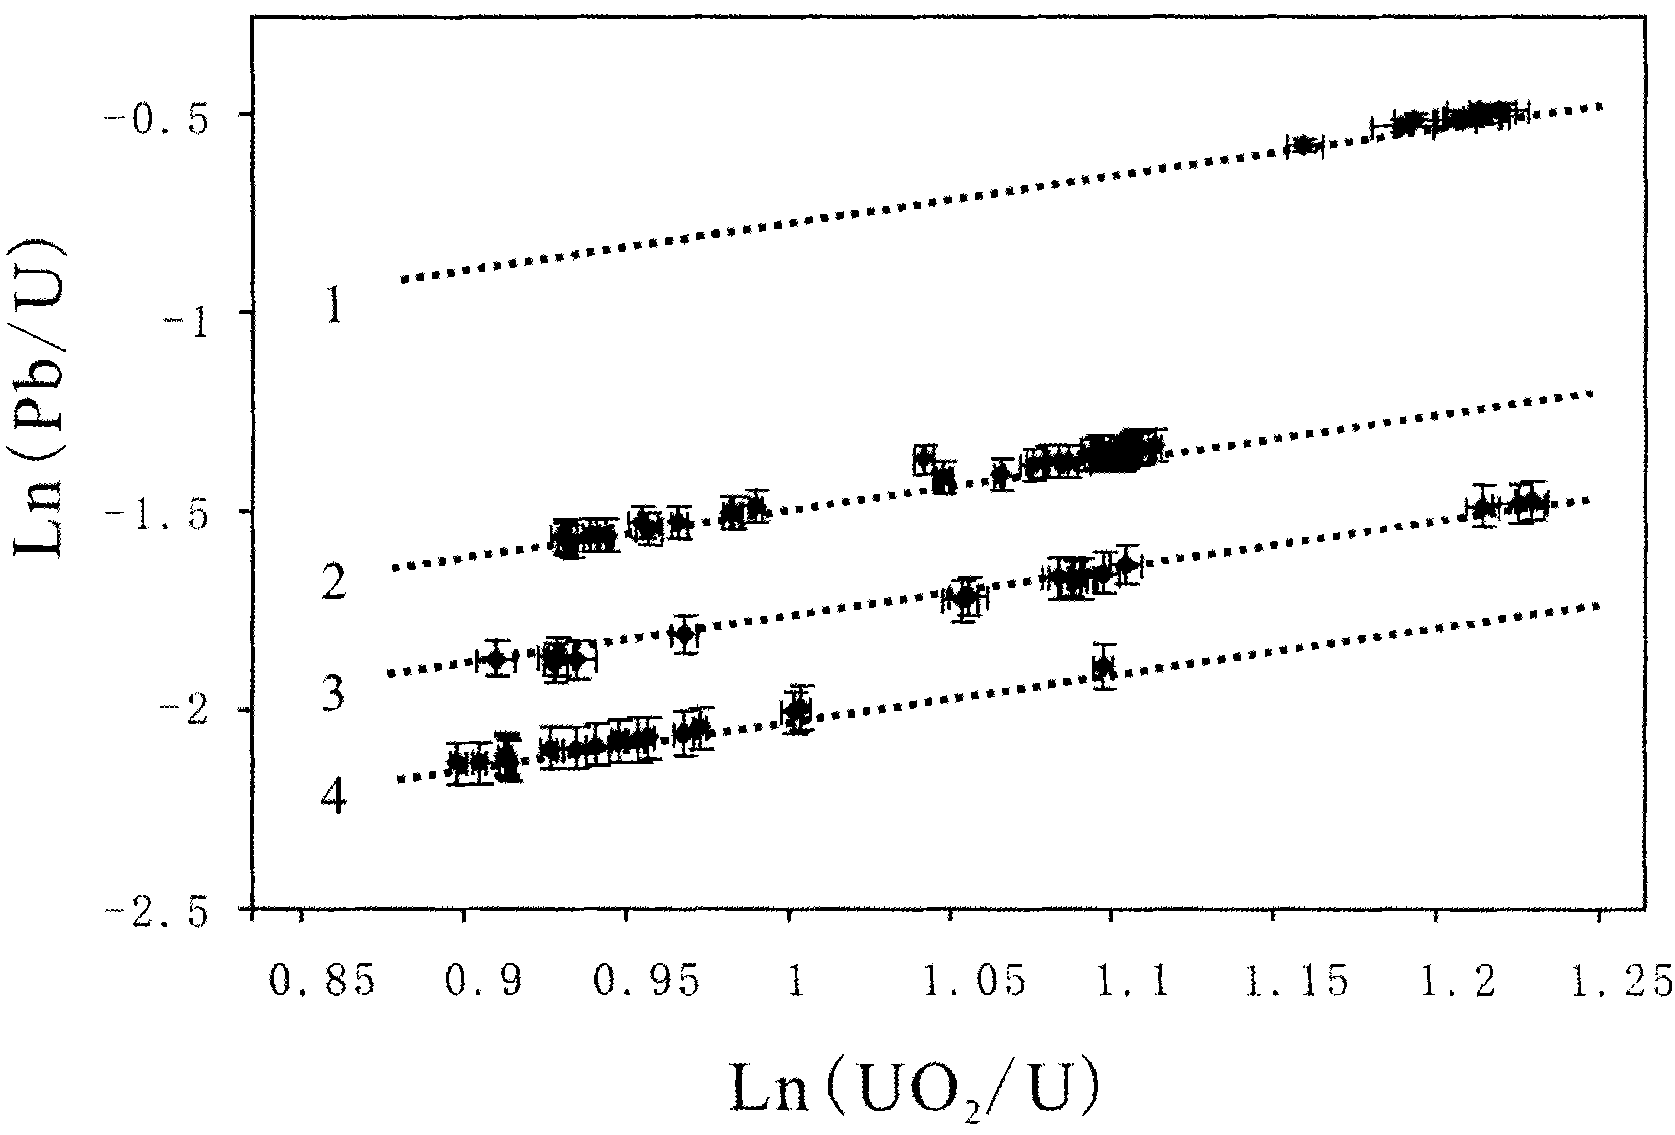 Method for uranium lead dating of baddeleyite by using secondary ion mass spectroscopy